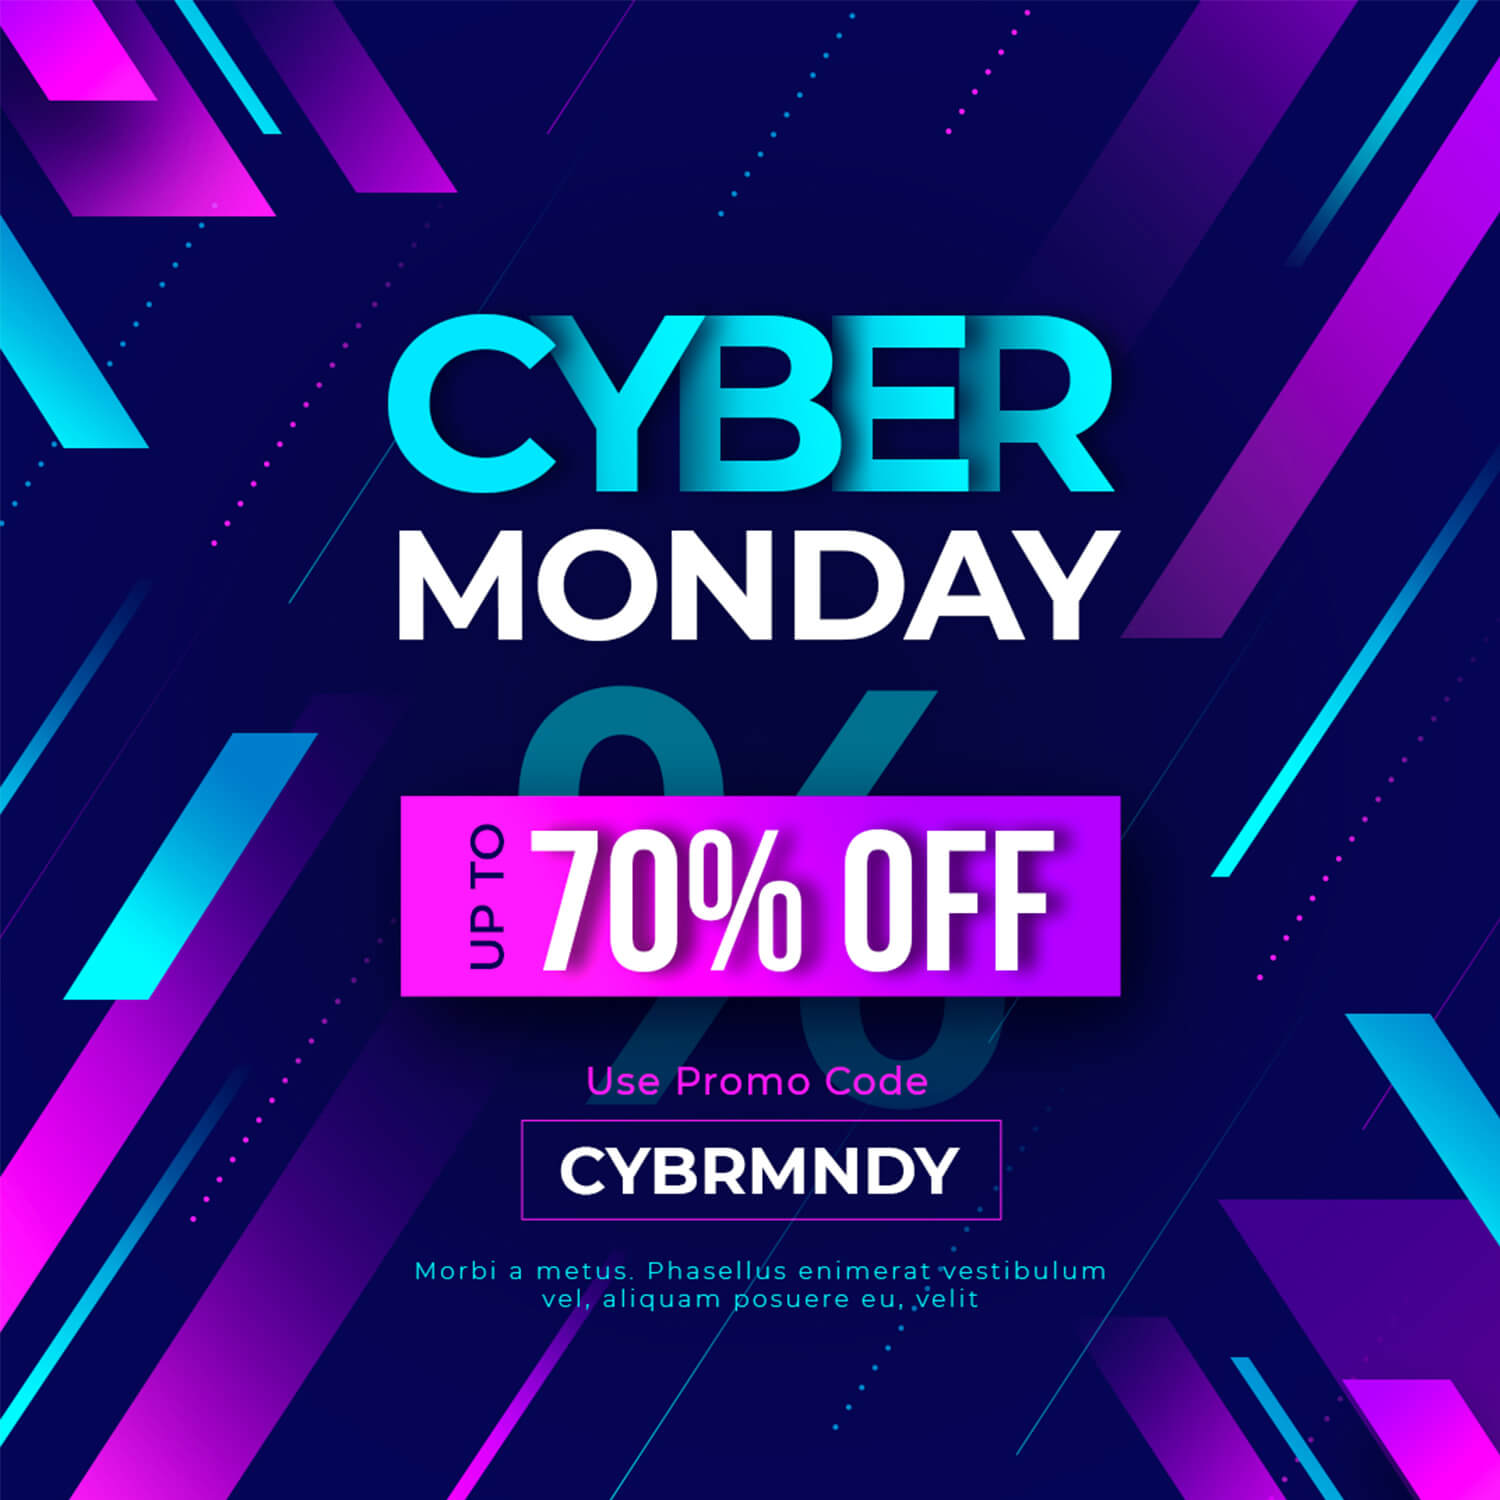 Free Bright Cyber Monday Banners Pack cover image.